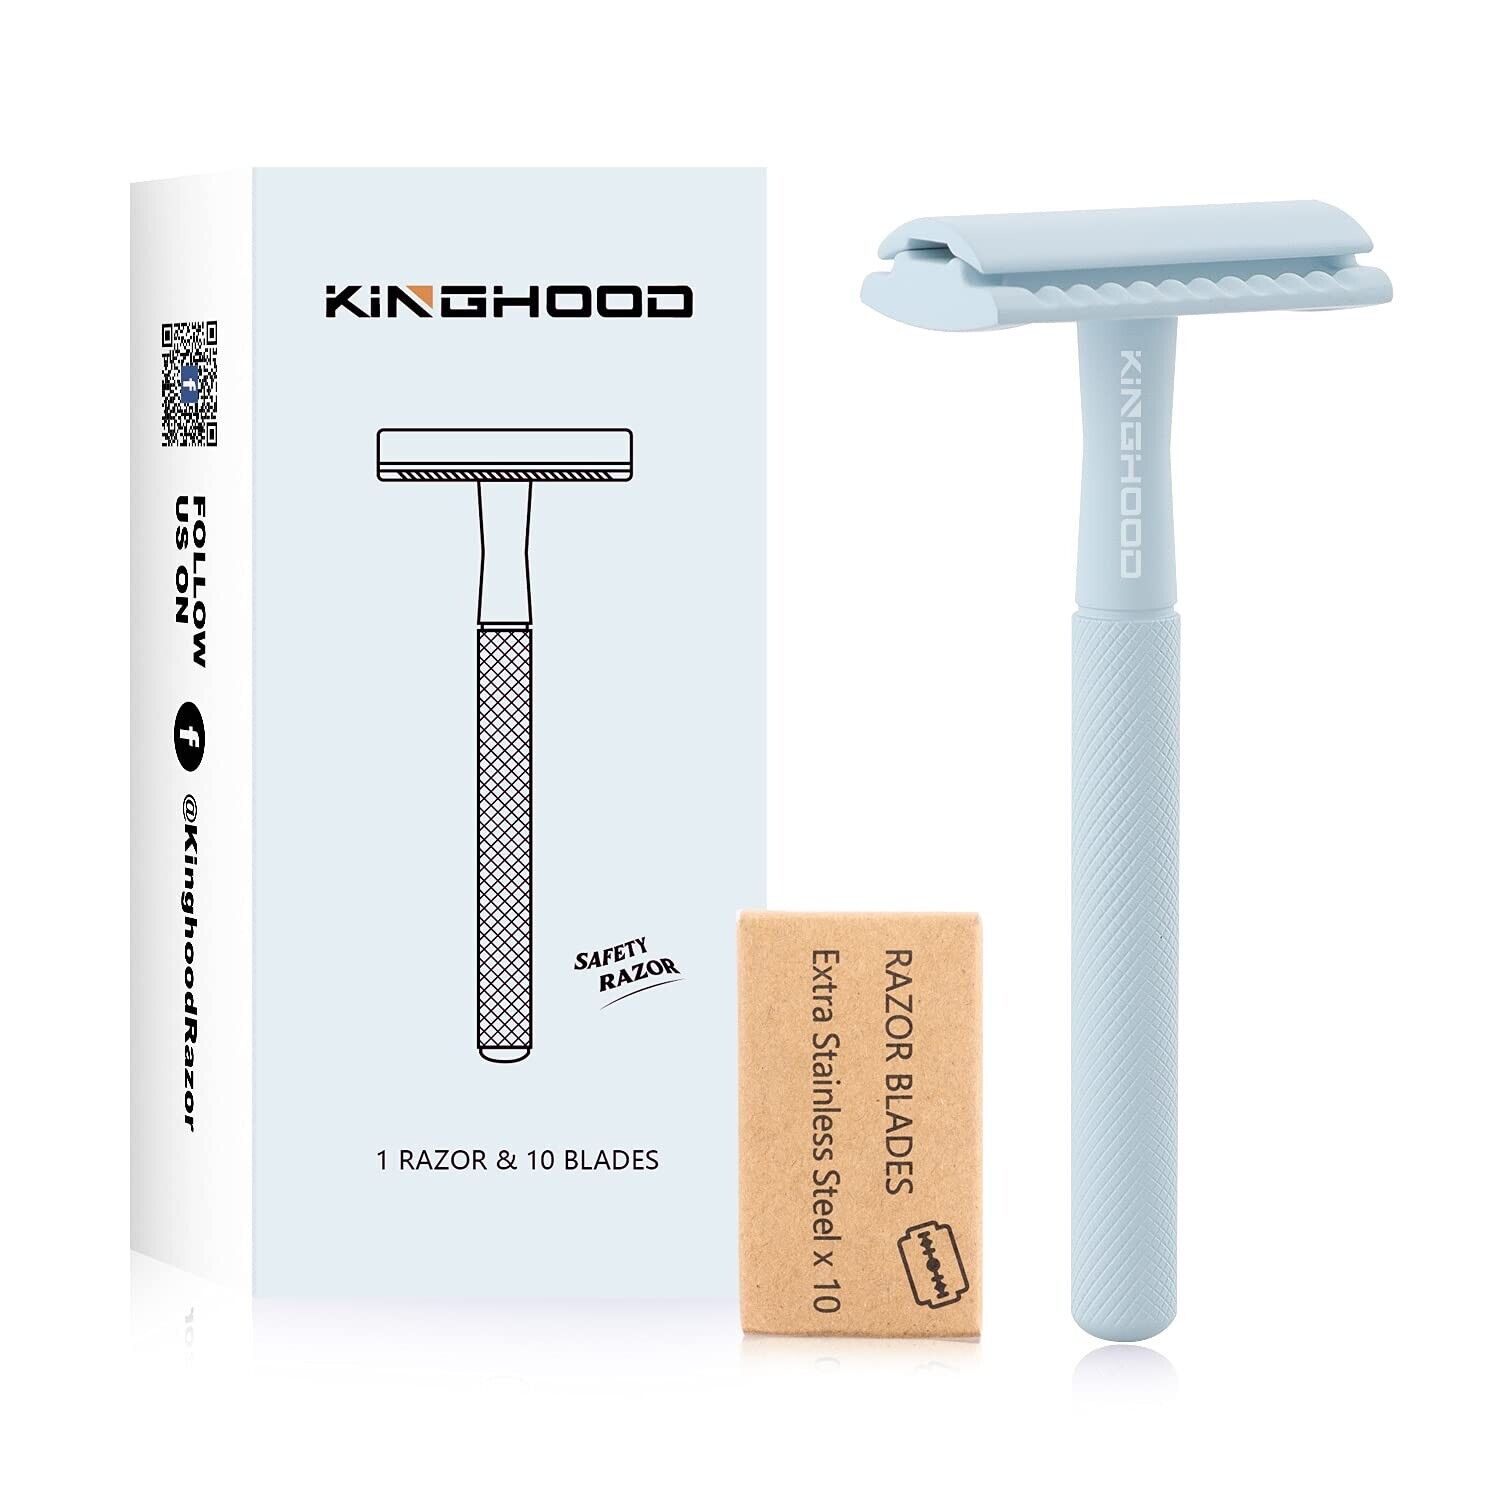 20 KINGHOOD Safety Razors, with 10 Double Edge Blades in each pack - Pink Blue